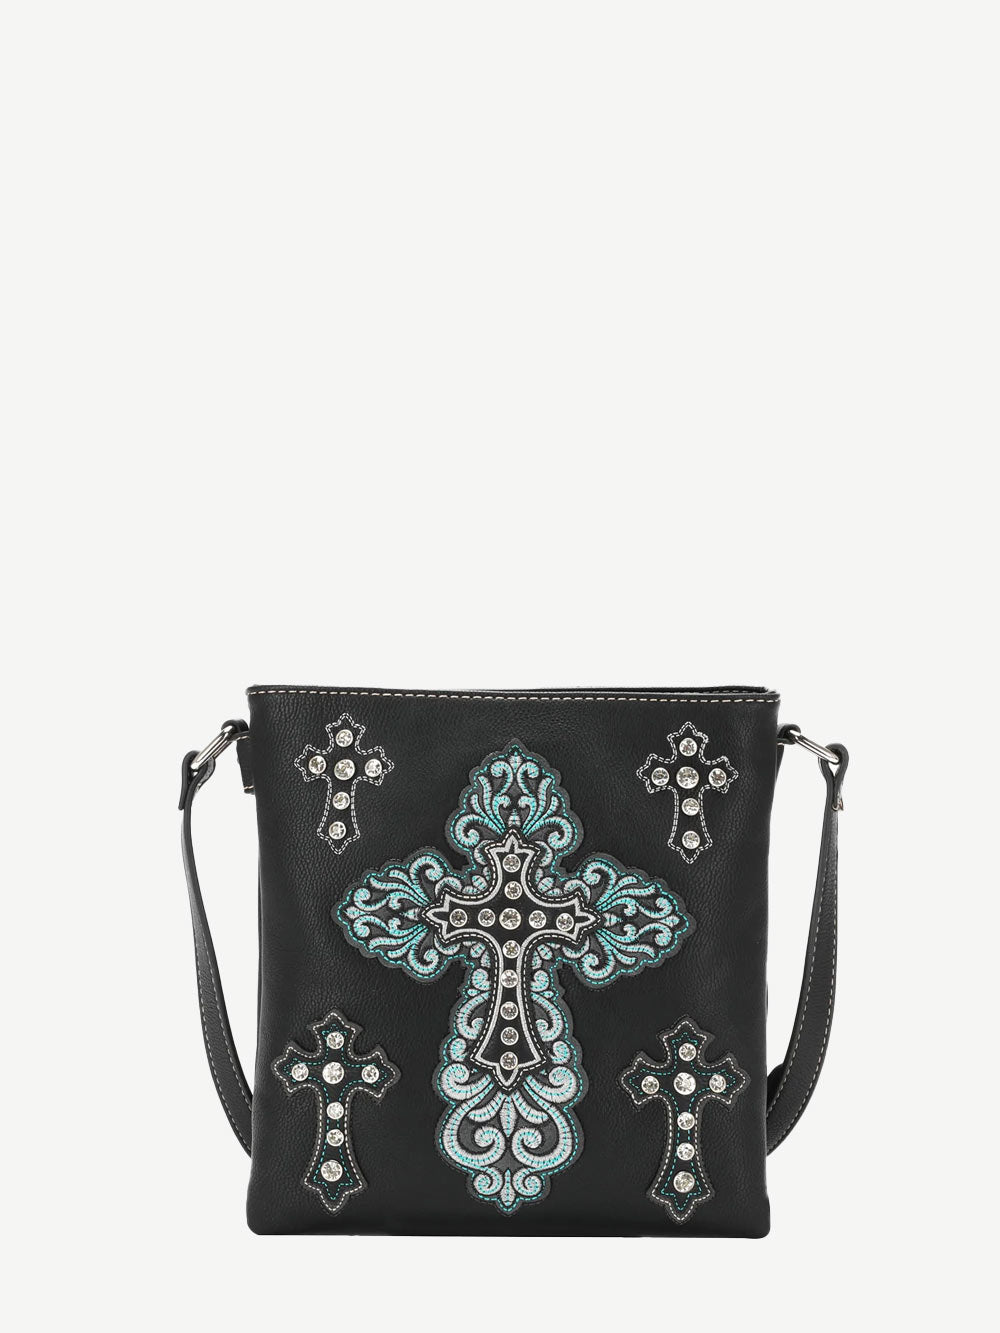 Montana West Embroidered Spiritual Concealed Carry Crossbody - Montana West World